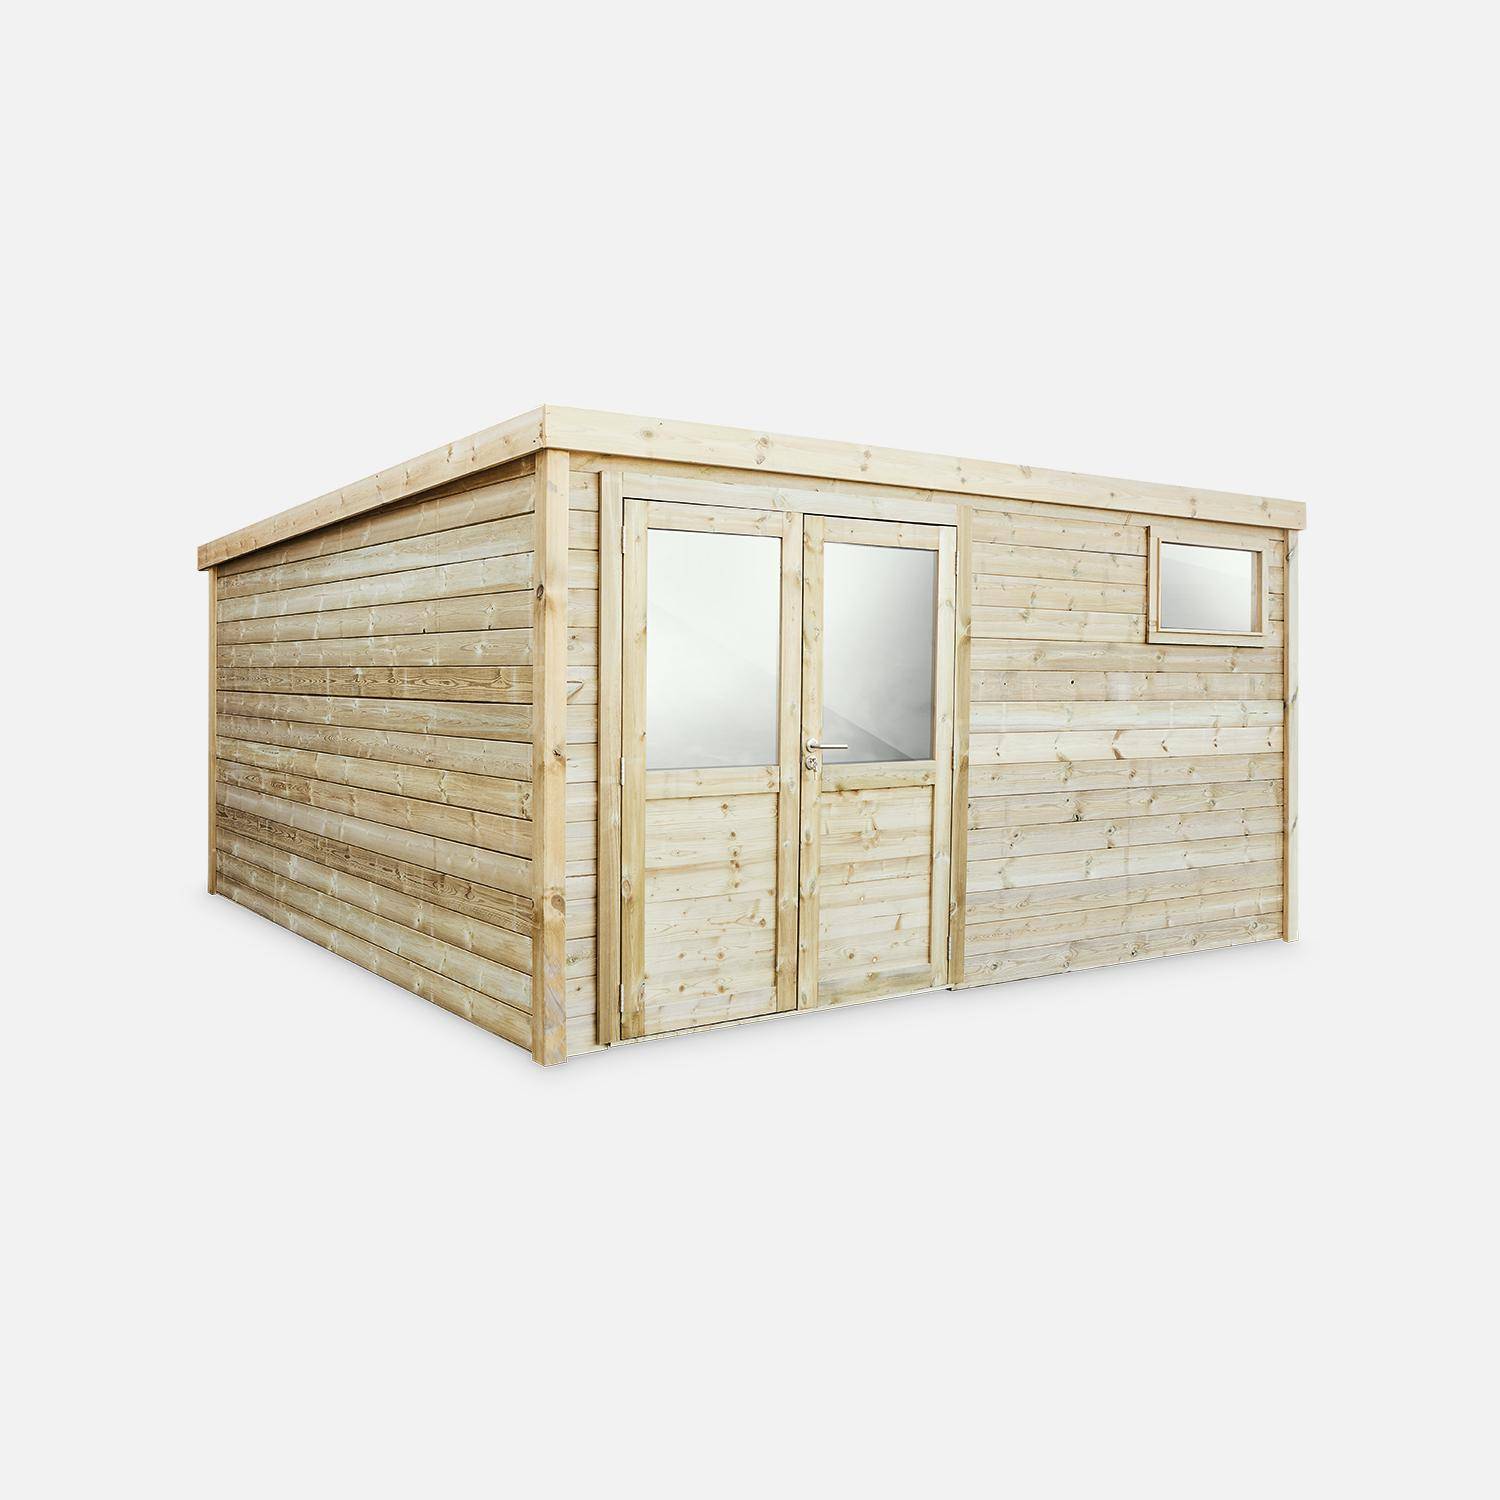 Wooden Garden Shed 16.3m², Treated Nordic Fir with Autoclave Treatment, Thickness 27mm,sweeek,Photo3